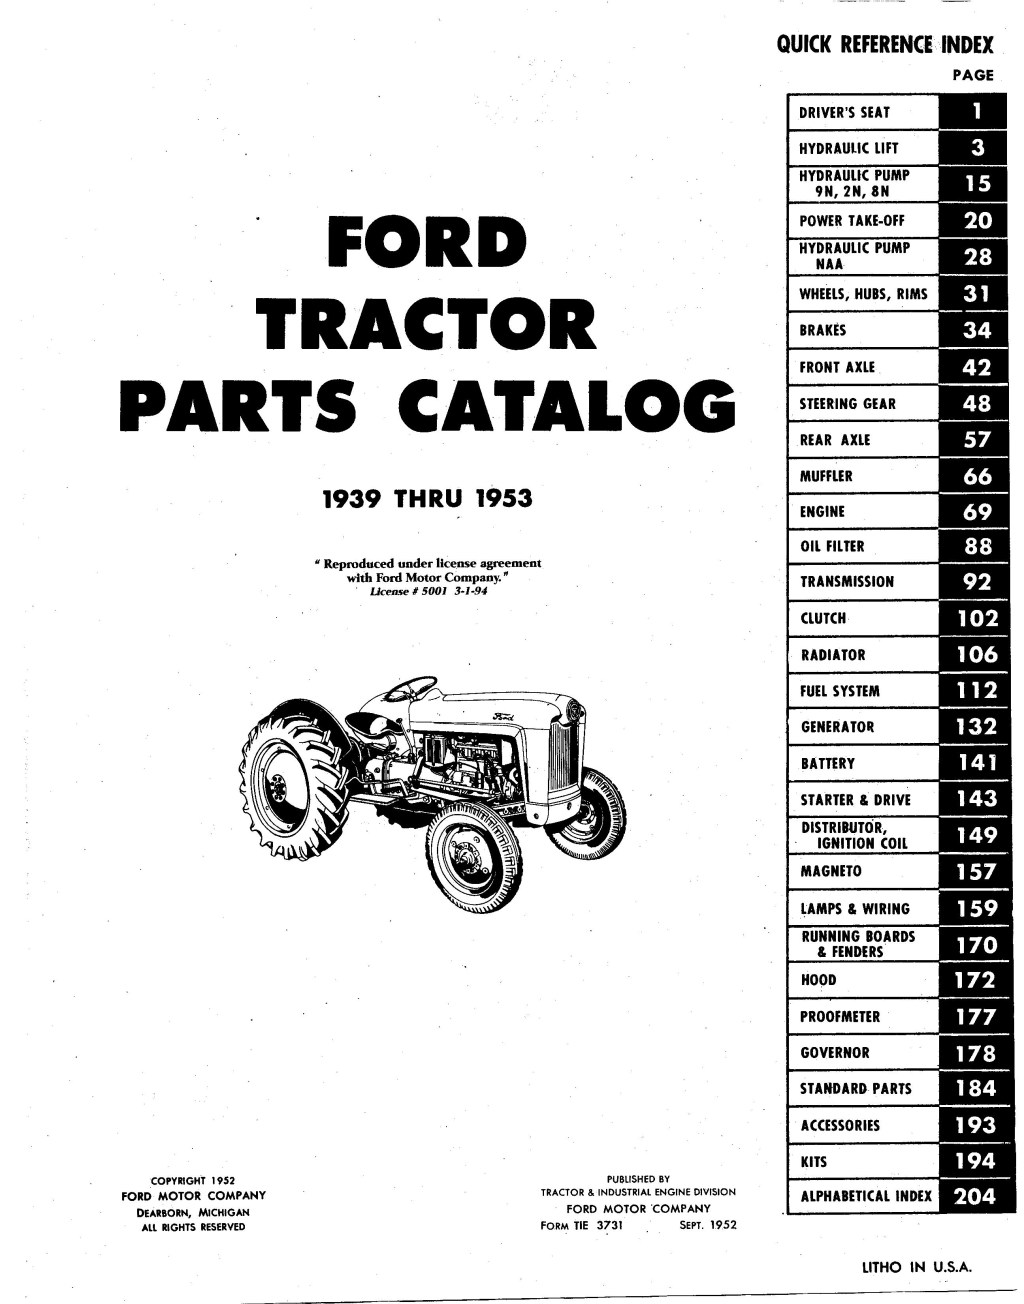 Picture of: Ford Master Tractor Parts Manual n n n Naa by MaxineSilveirad